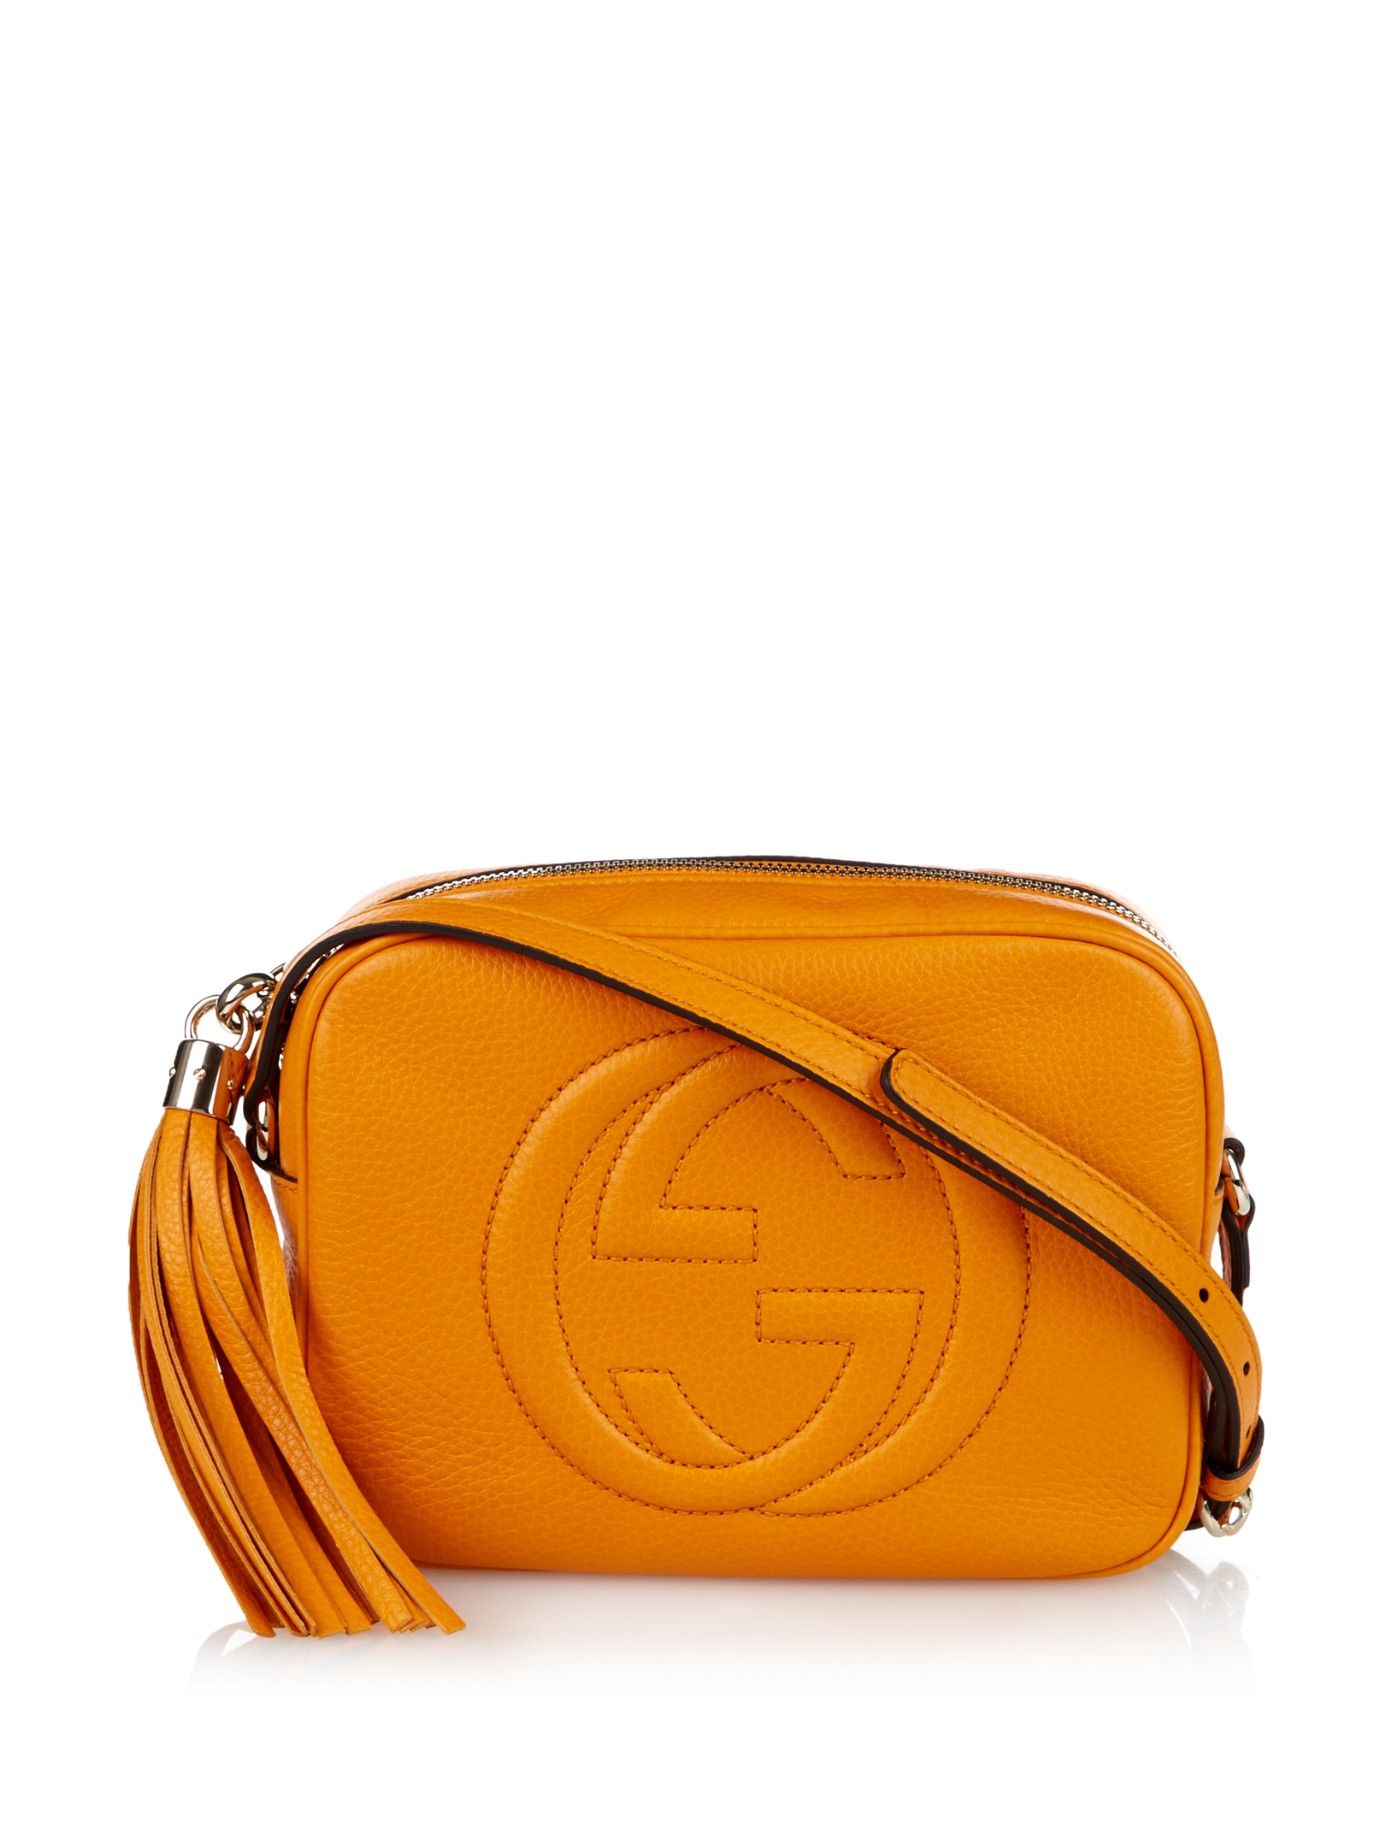 Lyst - Gucci Soho Grained-leather Cross-body Bag in Yellow